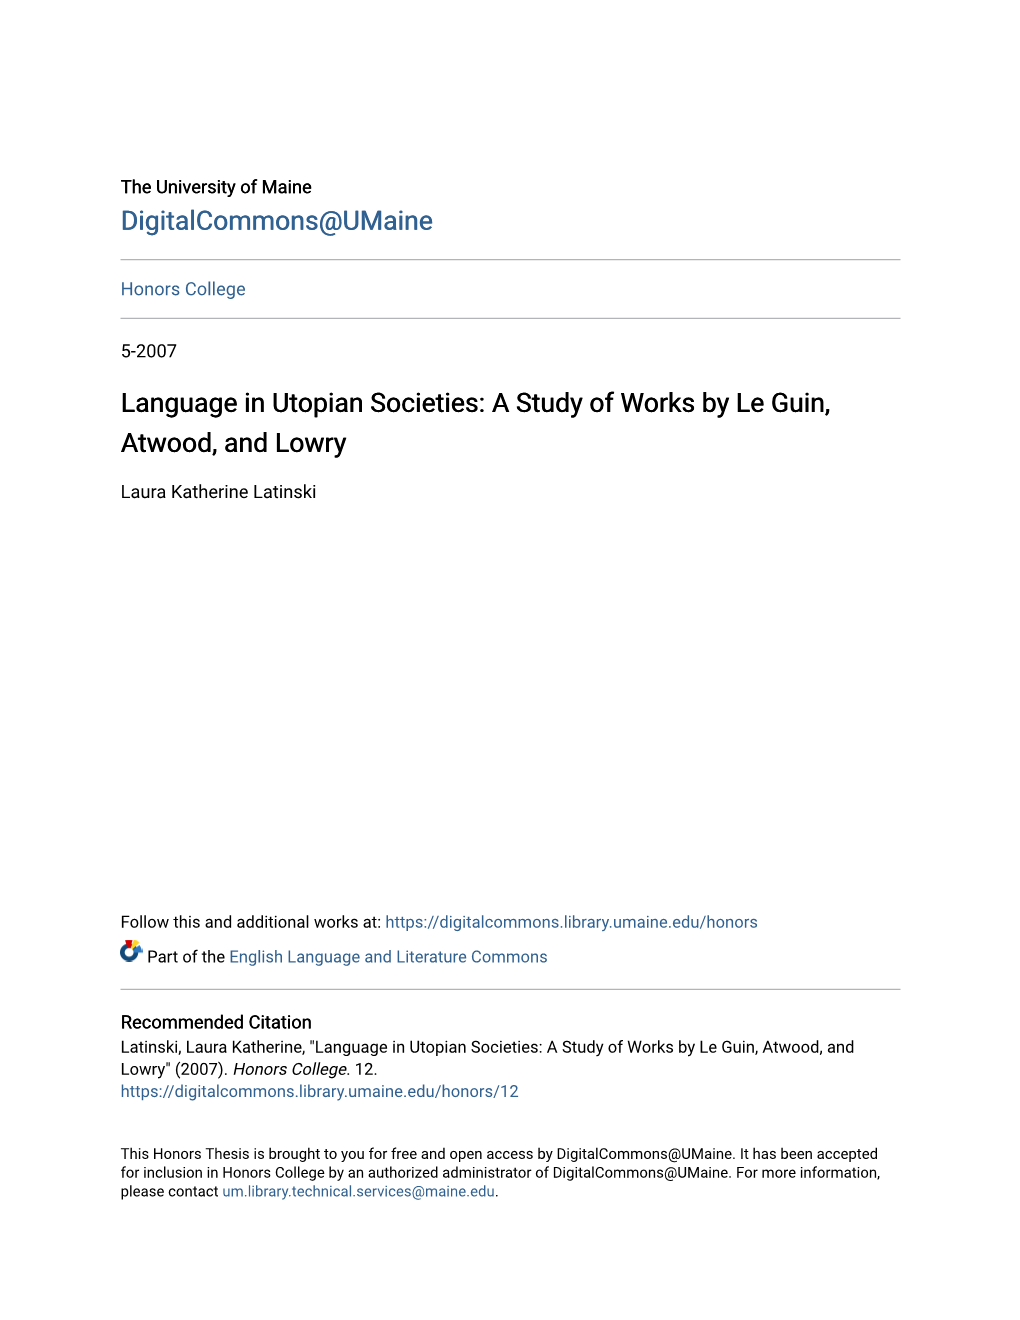 Language in Utopian Societies: a Study of Works by Le Guin, Atwood, and Lowry